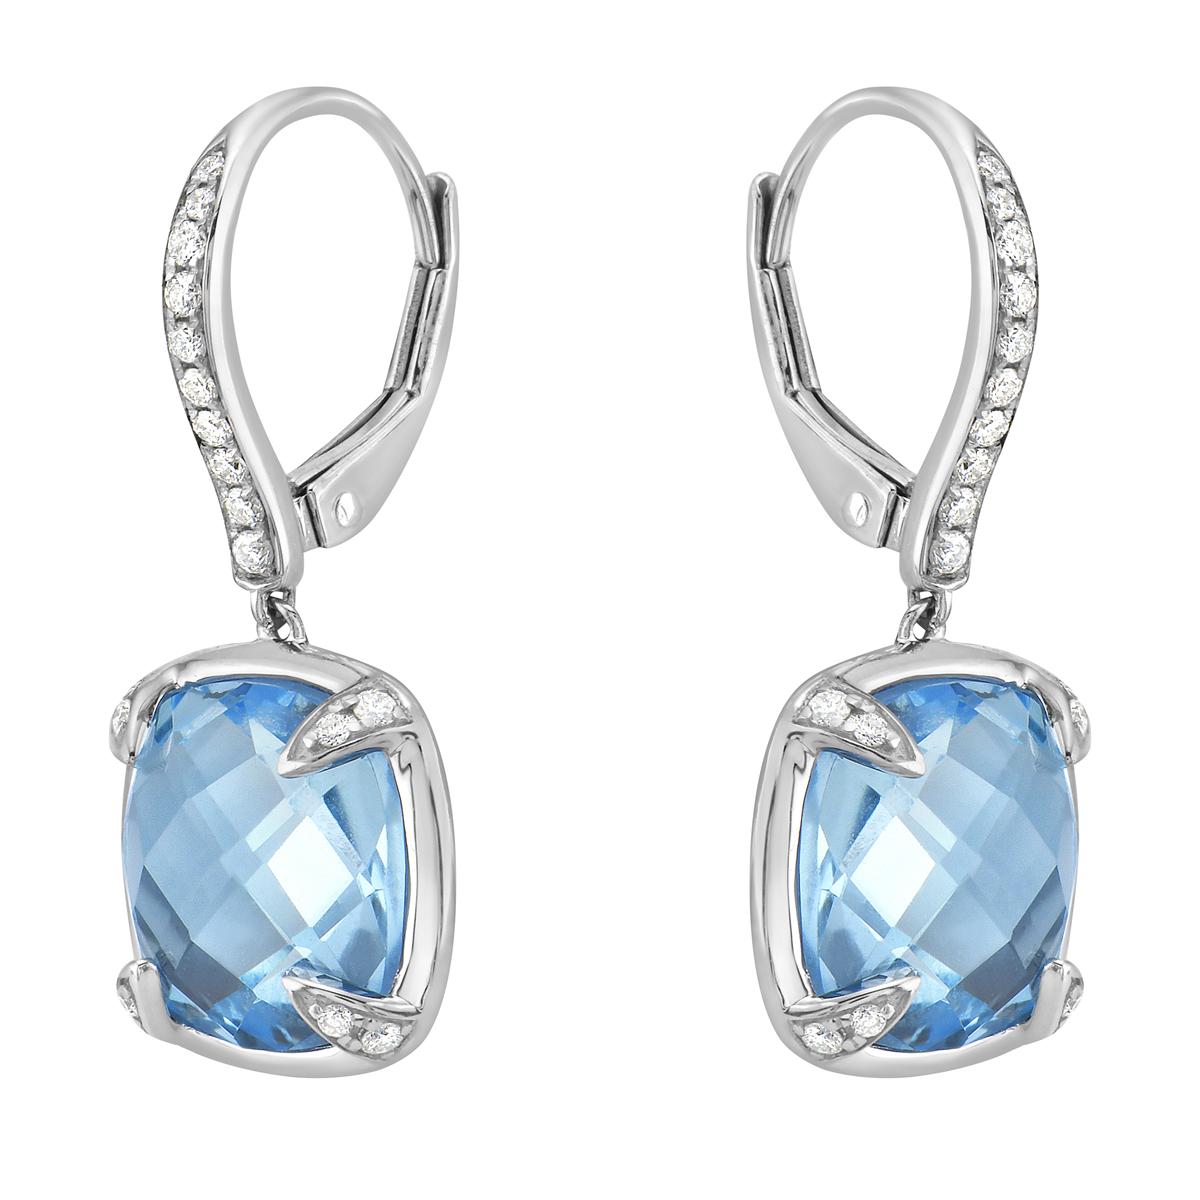 With these exquisite semi-precious sky blue topaz earrings, style and glamour are in the spotlight. These 14-karat cushion cut earrings are made from 3.1 grams of gold, 2 sky blue topaz's totaling 8.80 karats, and are surrounded by 36 round SI1-SI2,